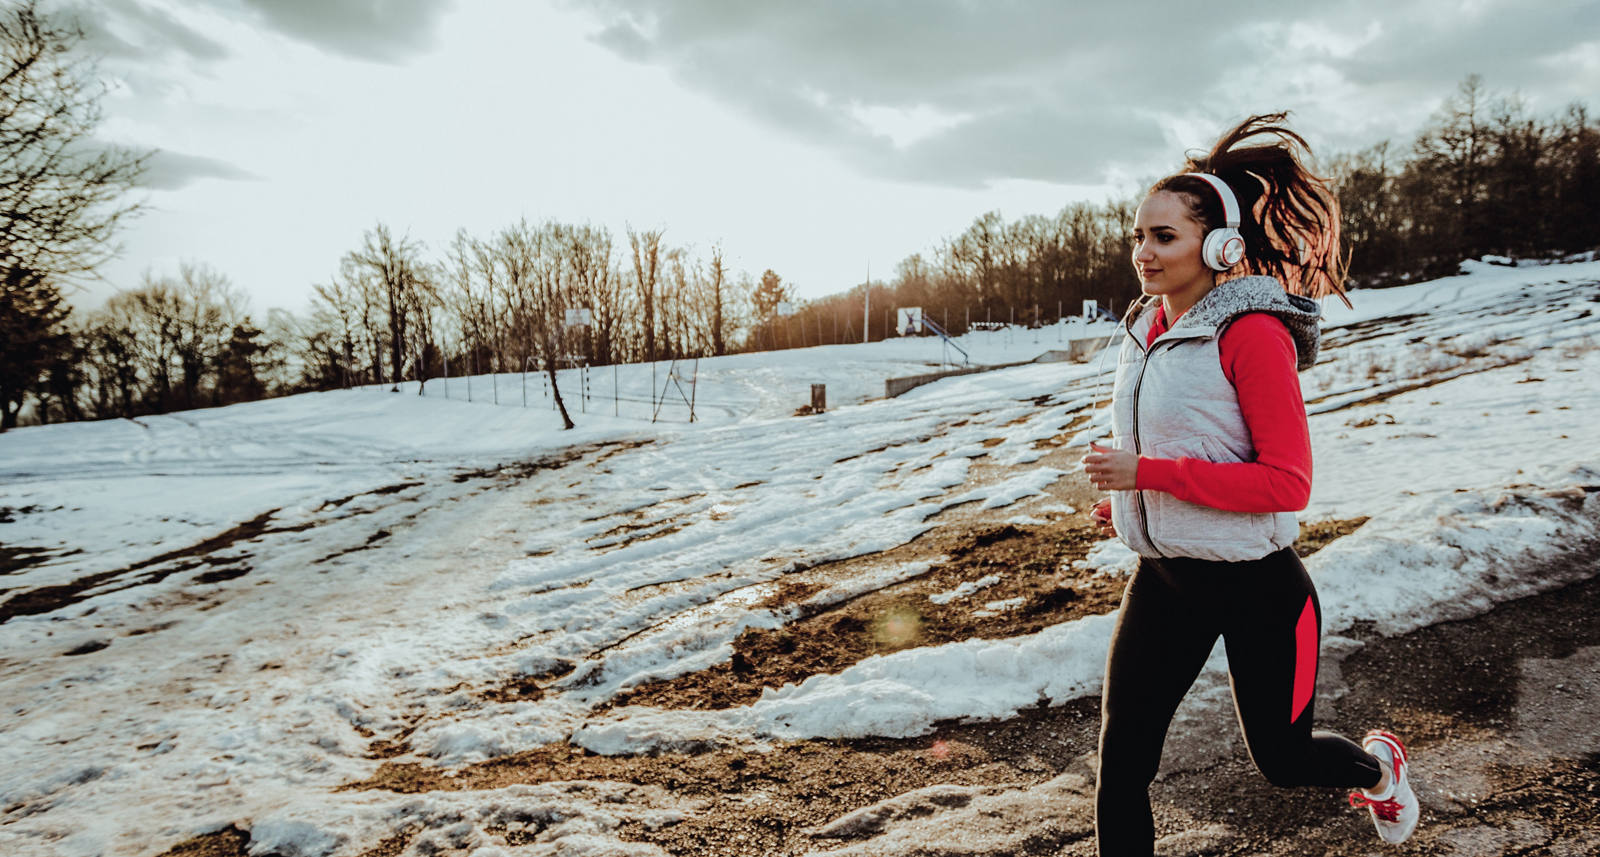 Jogging in winter: important tips for cold days